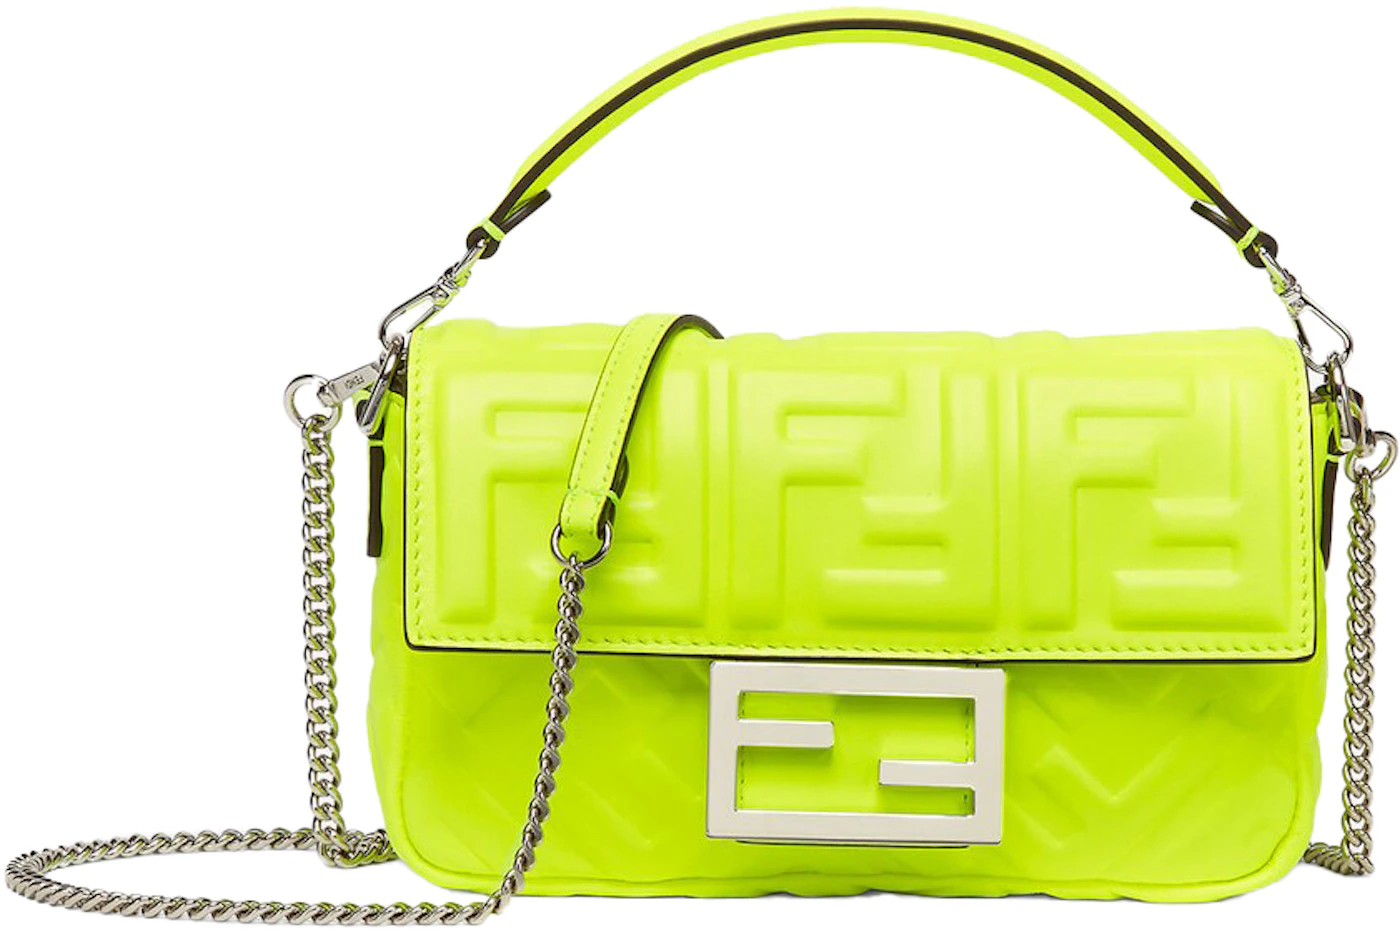 Fendi by Marc Jacobs Baguette Mini Neon Yellow Nappa Leather Bag in ...